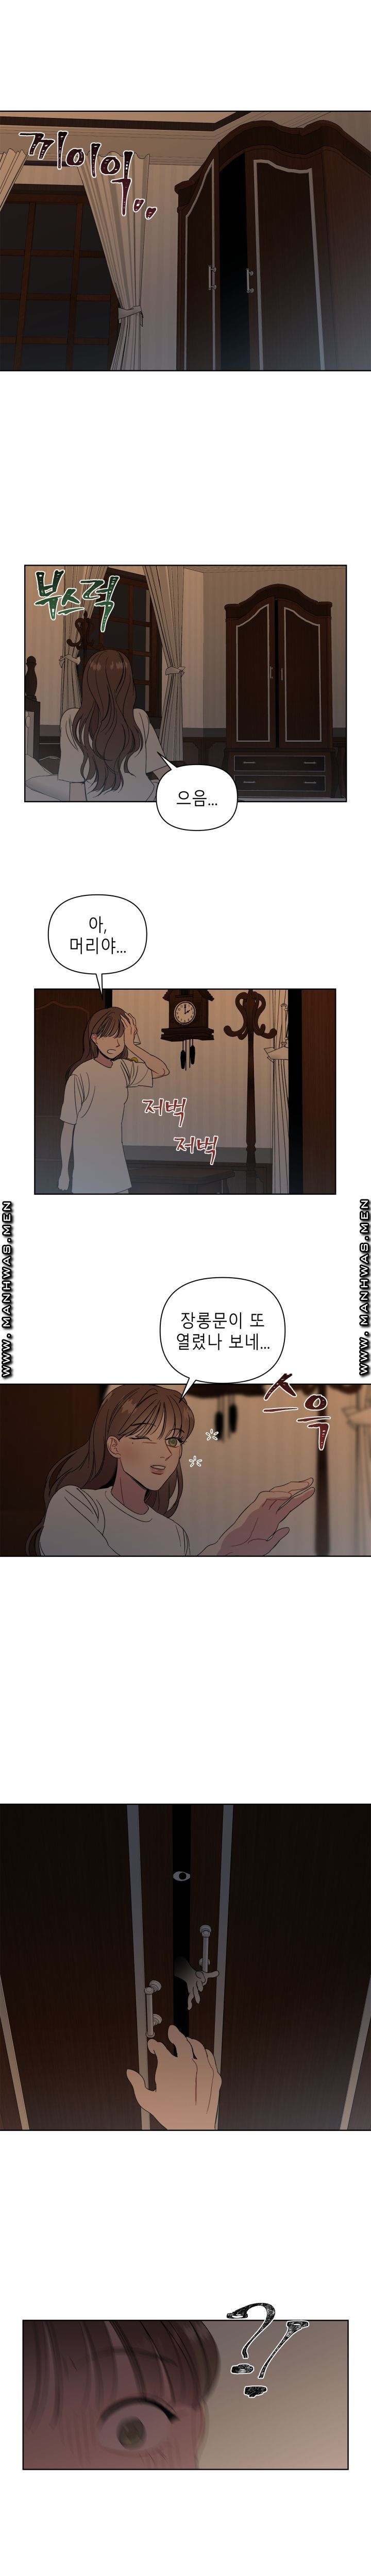 Heaven Raw - Chapter 8 Page 4